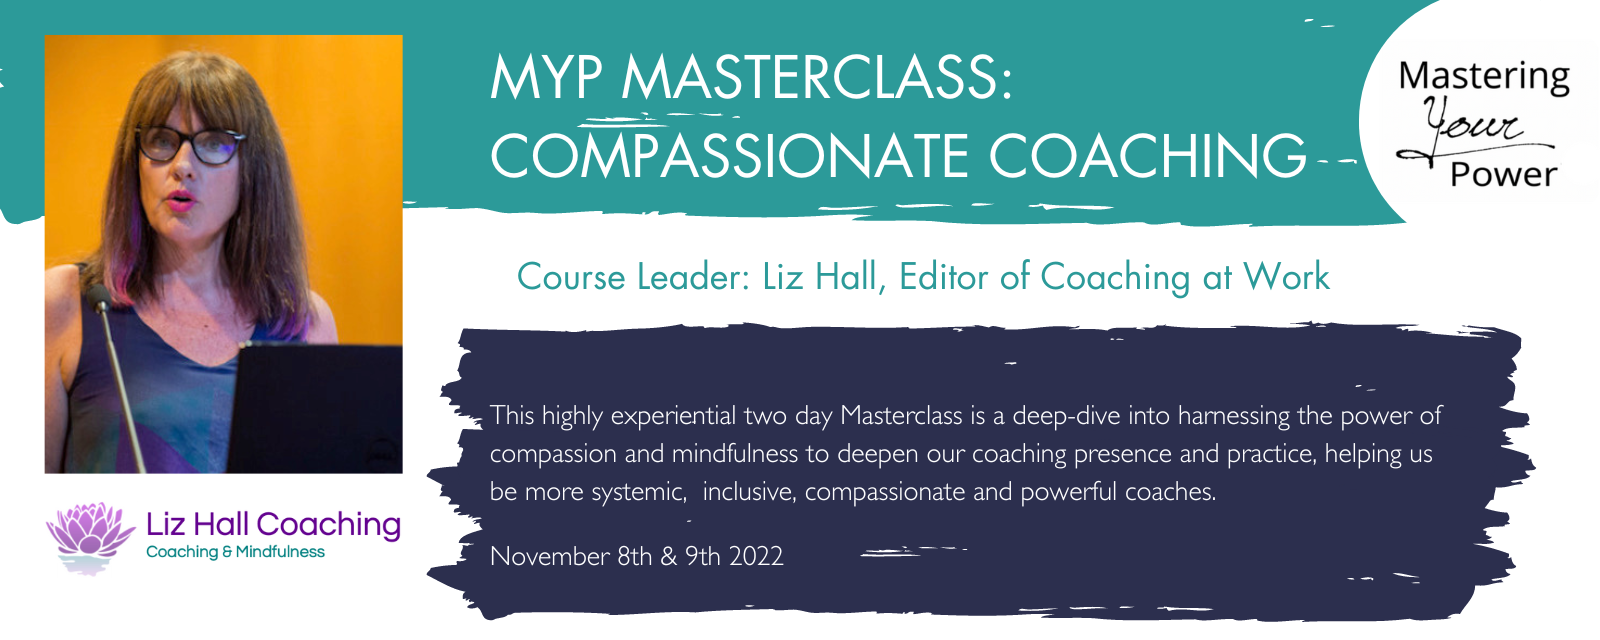 Compassionate Coaching with a systemic diversity, inclusion, belonging ...